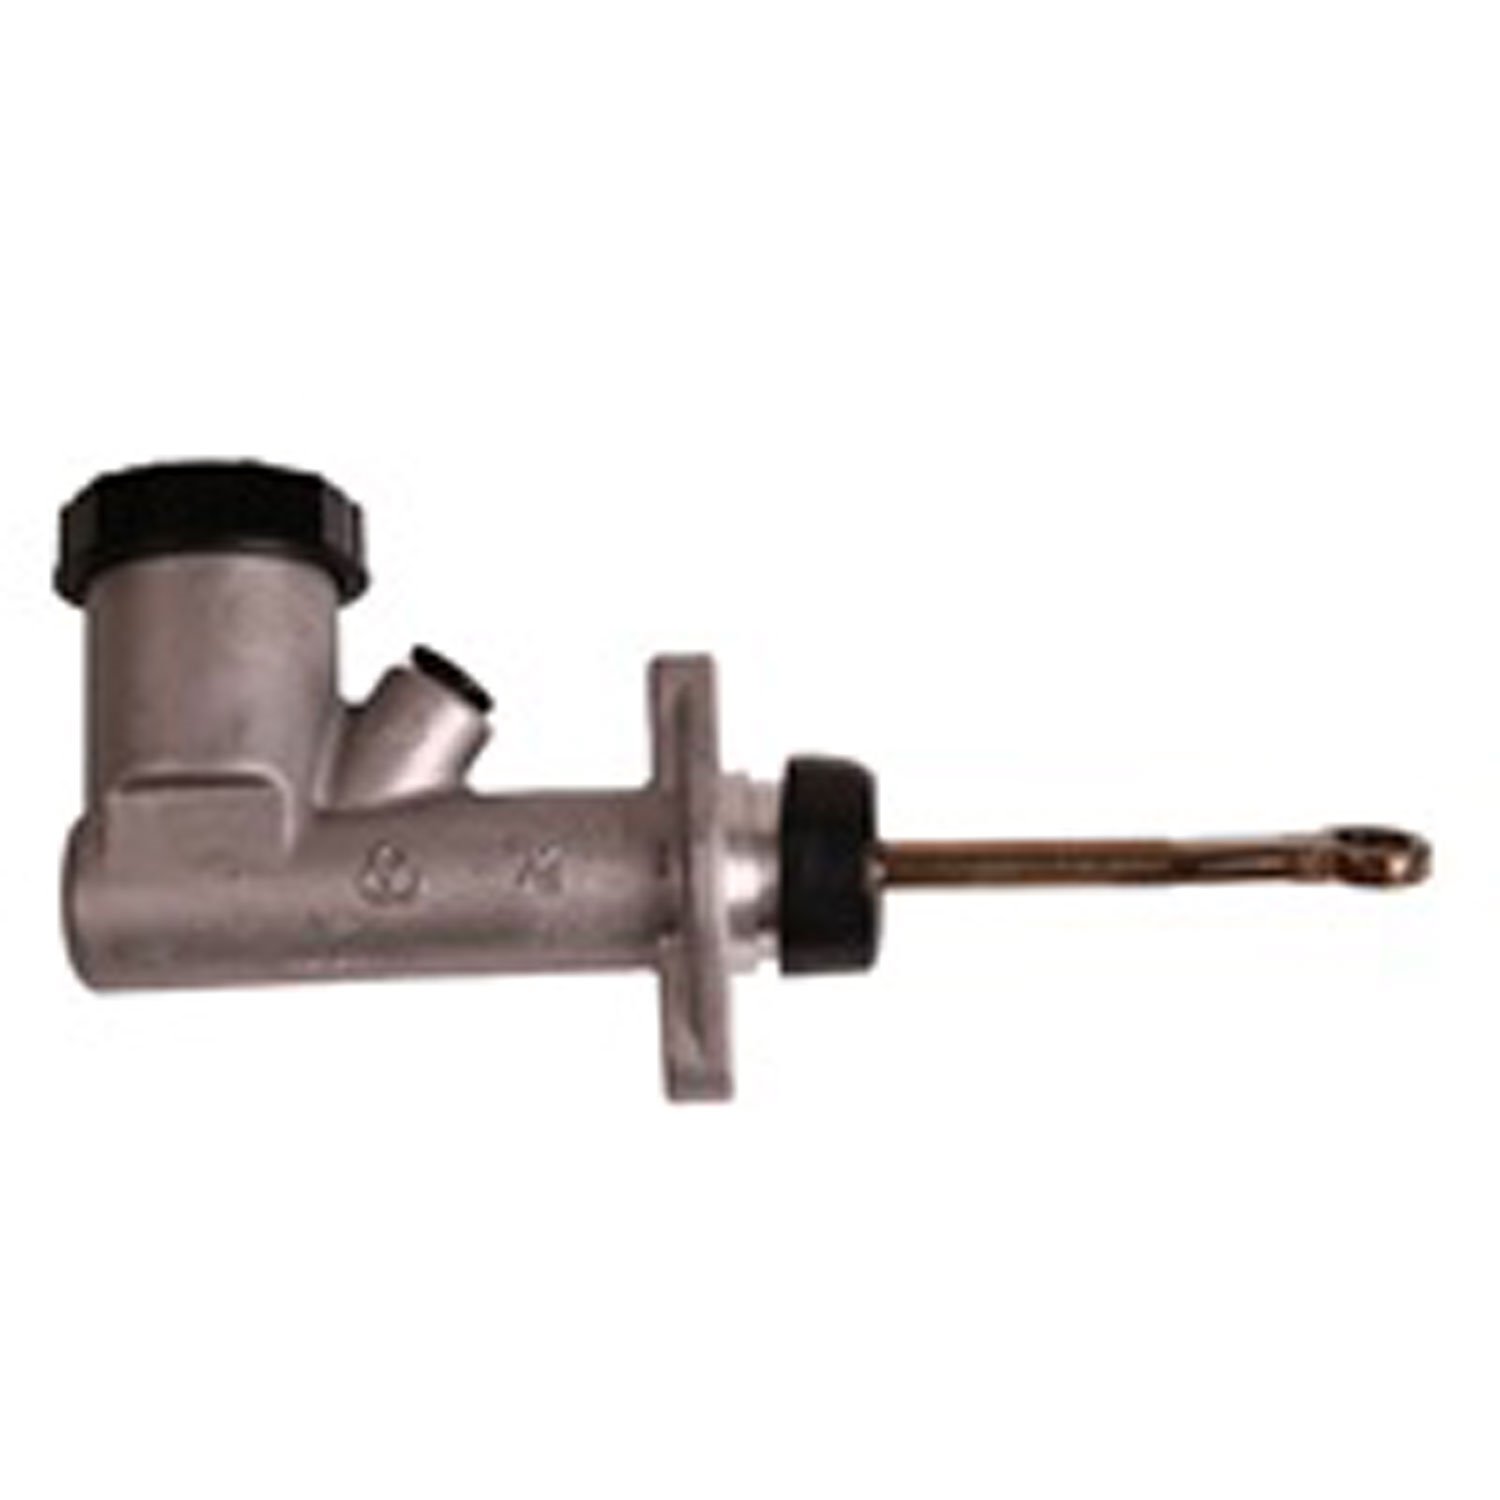 Replacement clutch master cylinder from Omix-ADA, Fits 80-83 Jeep CJ5 80-86 CJ7 and 81-86 CJ8 with 4 or 6 cylinder engines.